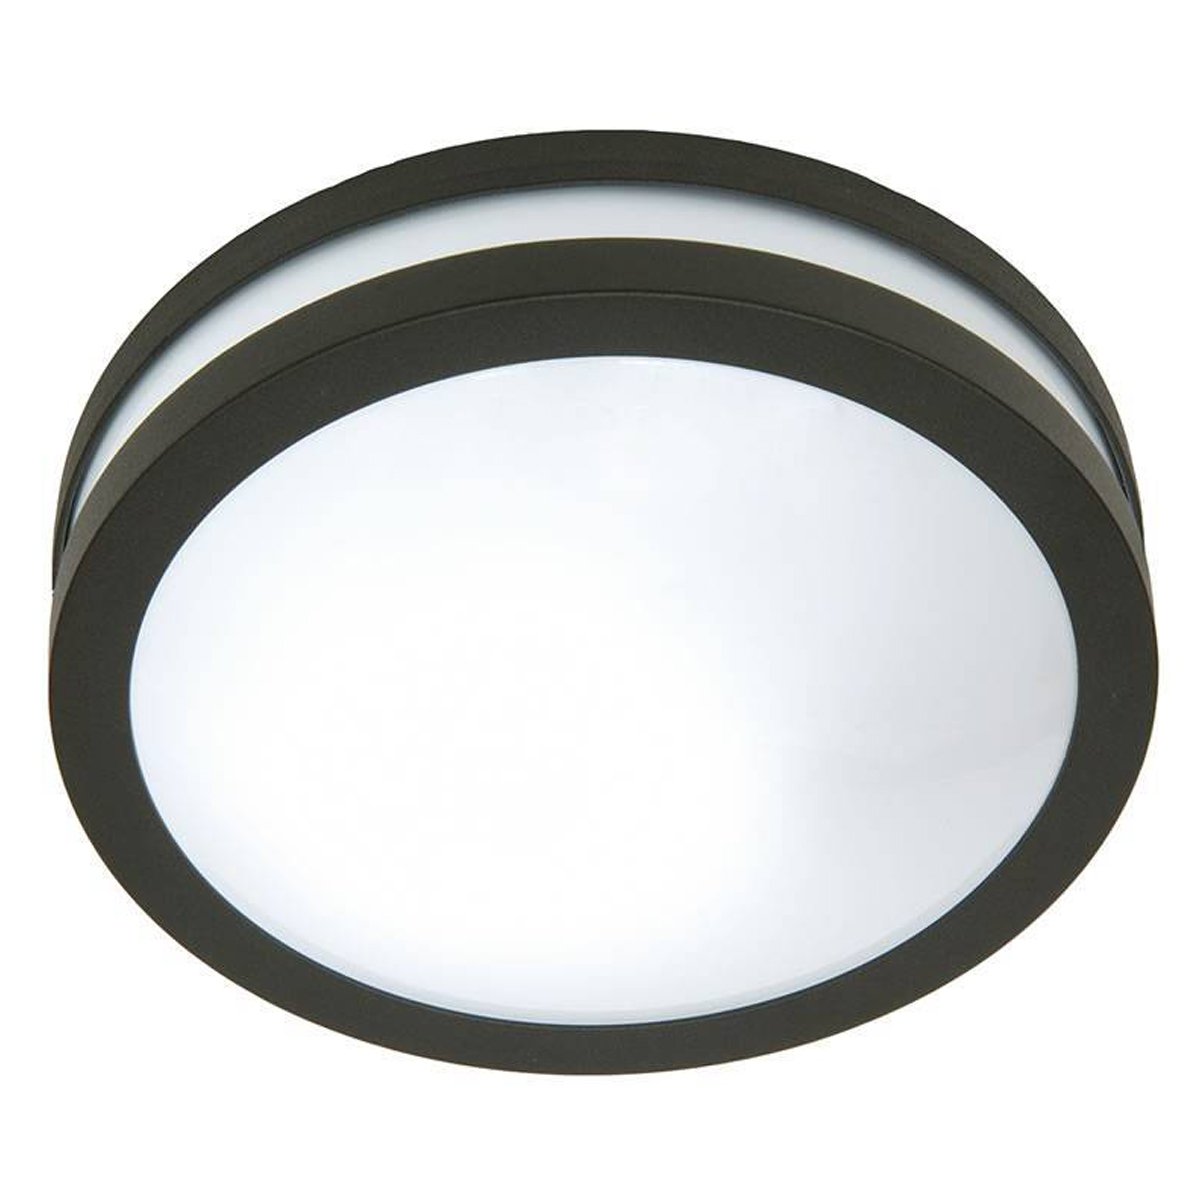 Our Hallie dark grey aluminium wall mounted round outdoor light with built in LED's would look perfect in a modern or more traditional home design. Outside wall lights can provide atmospheric light in your garden, at the front door or on the terrace as well as a great security solution. It is designed for durability and longevity with its robust material producing a fully weatherproof and water resistant light fitting.